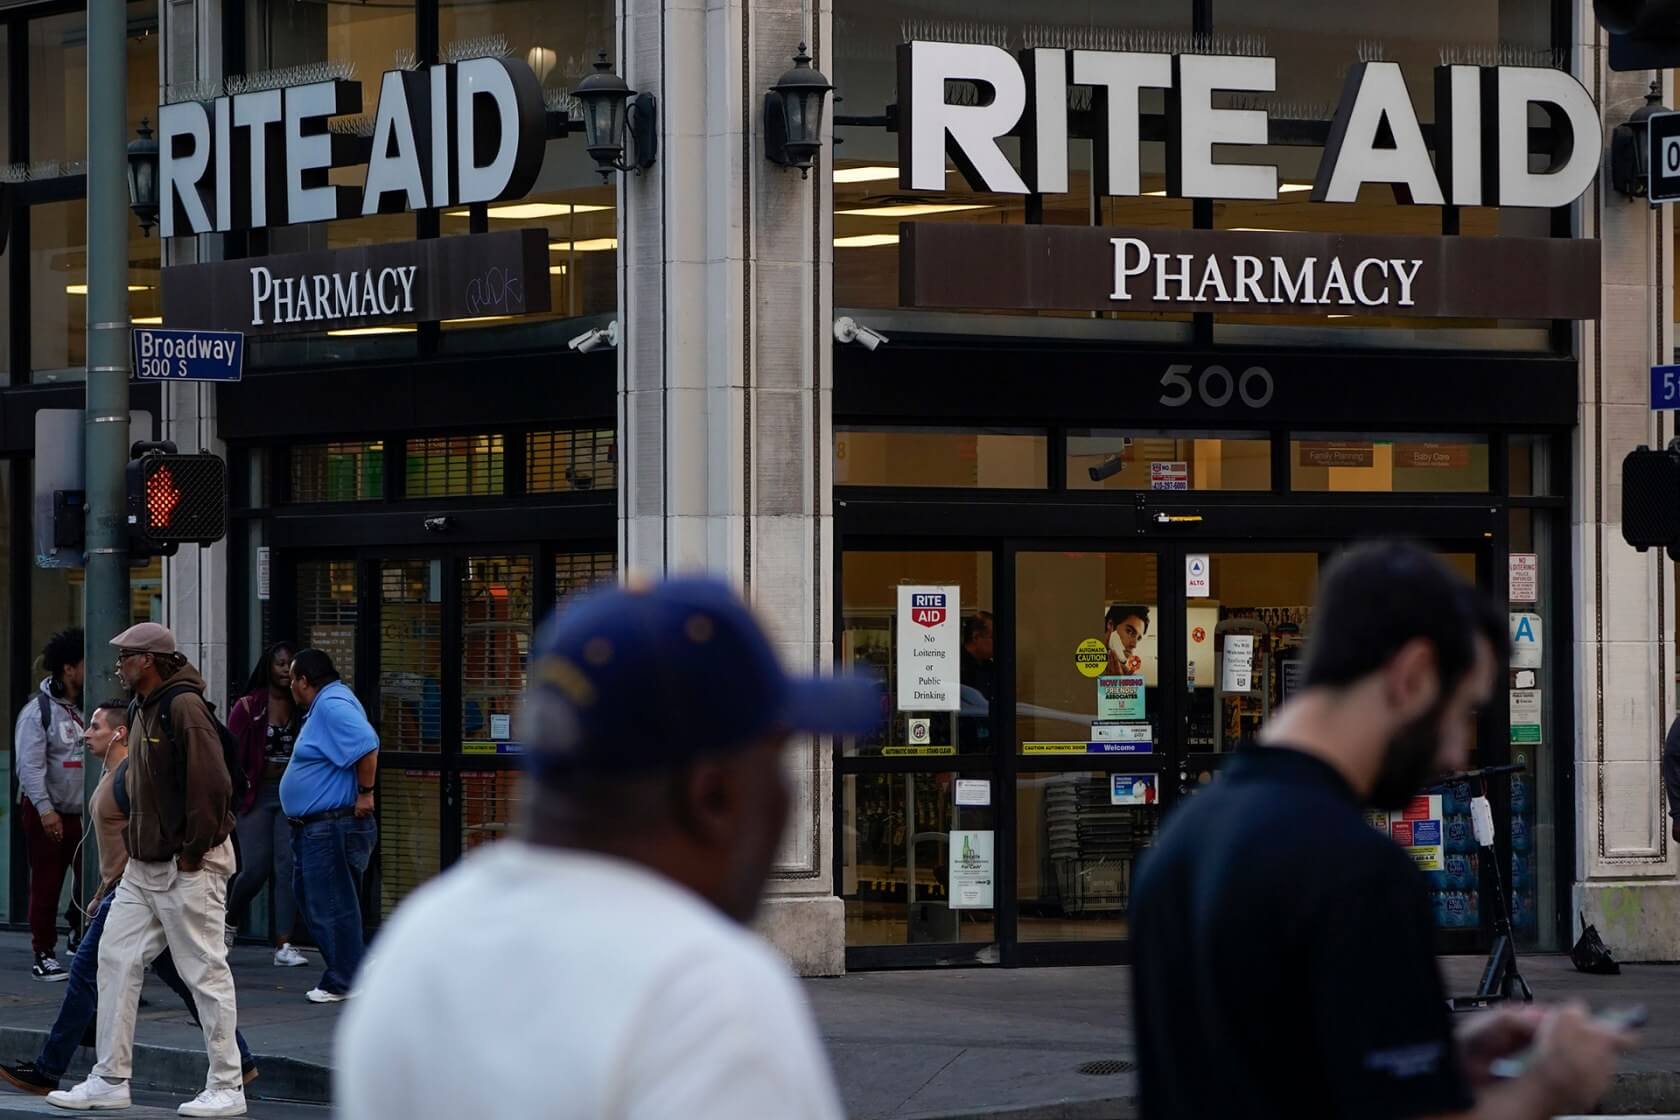 Rite Aid has been using facial recognition tech across hundreds of its stores thumbnail